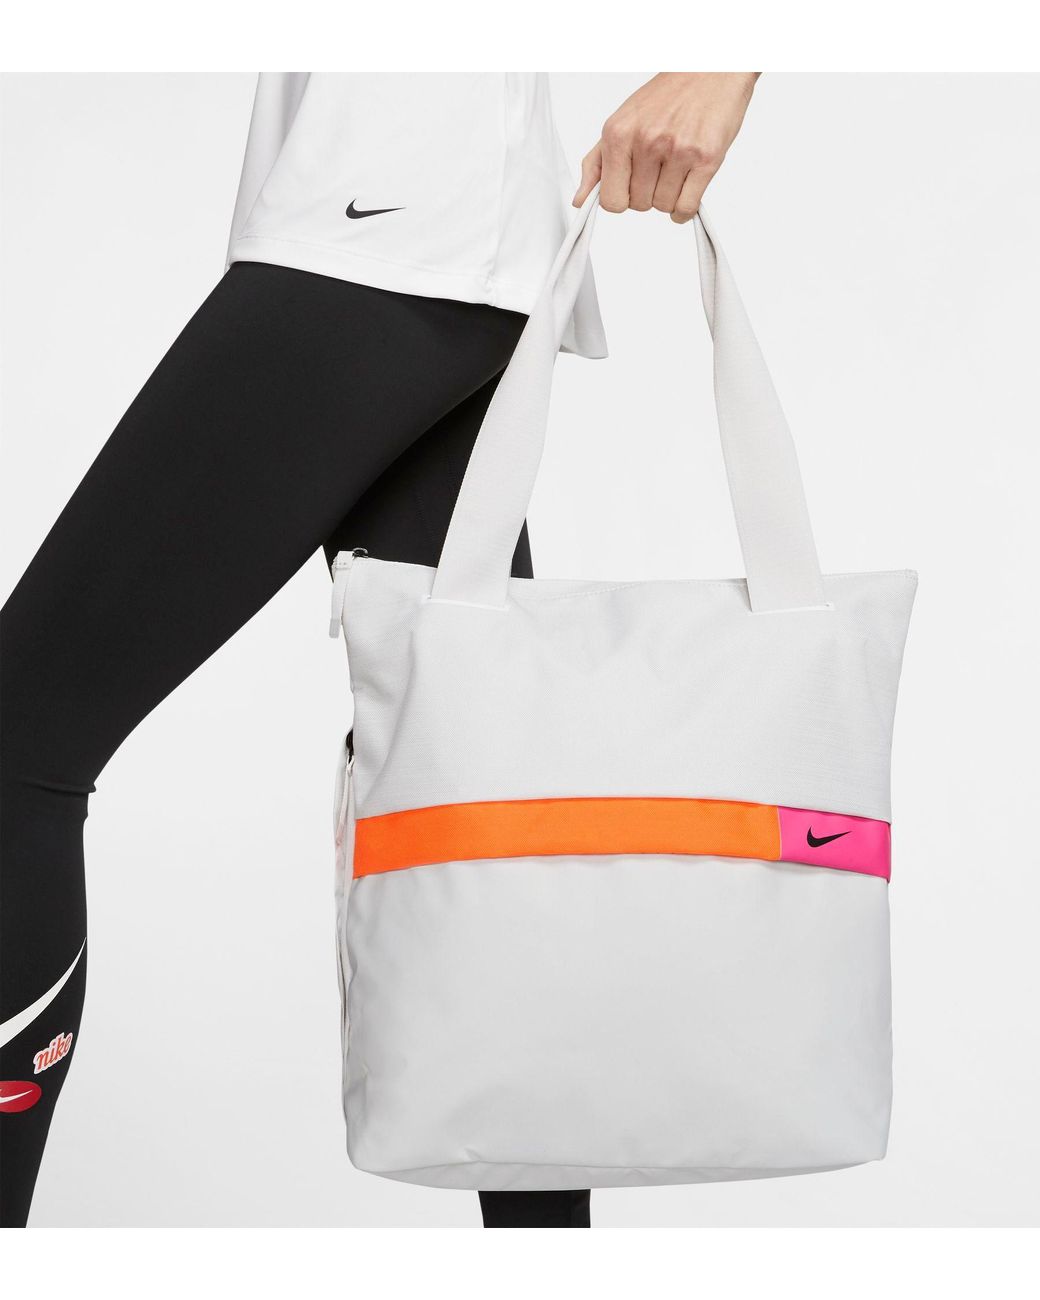 Nike Radiate Graphic Training Tote Bag in White | Lyst